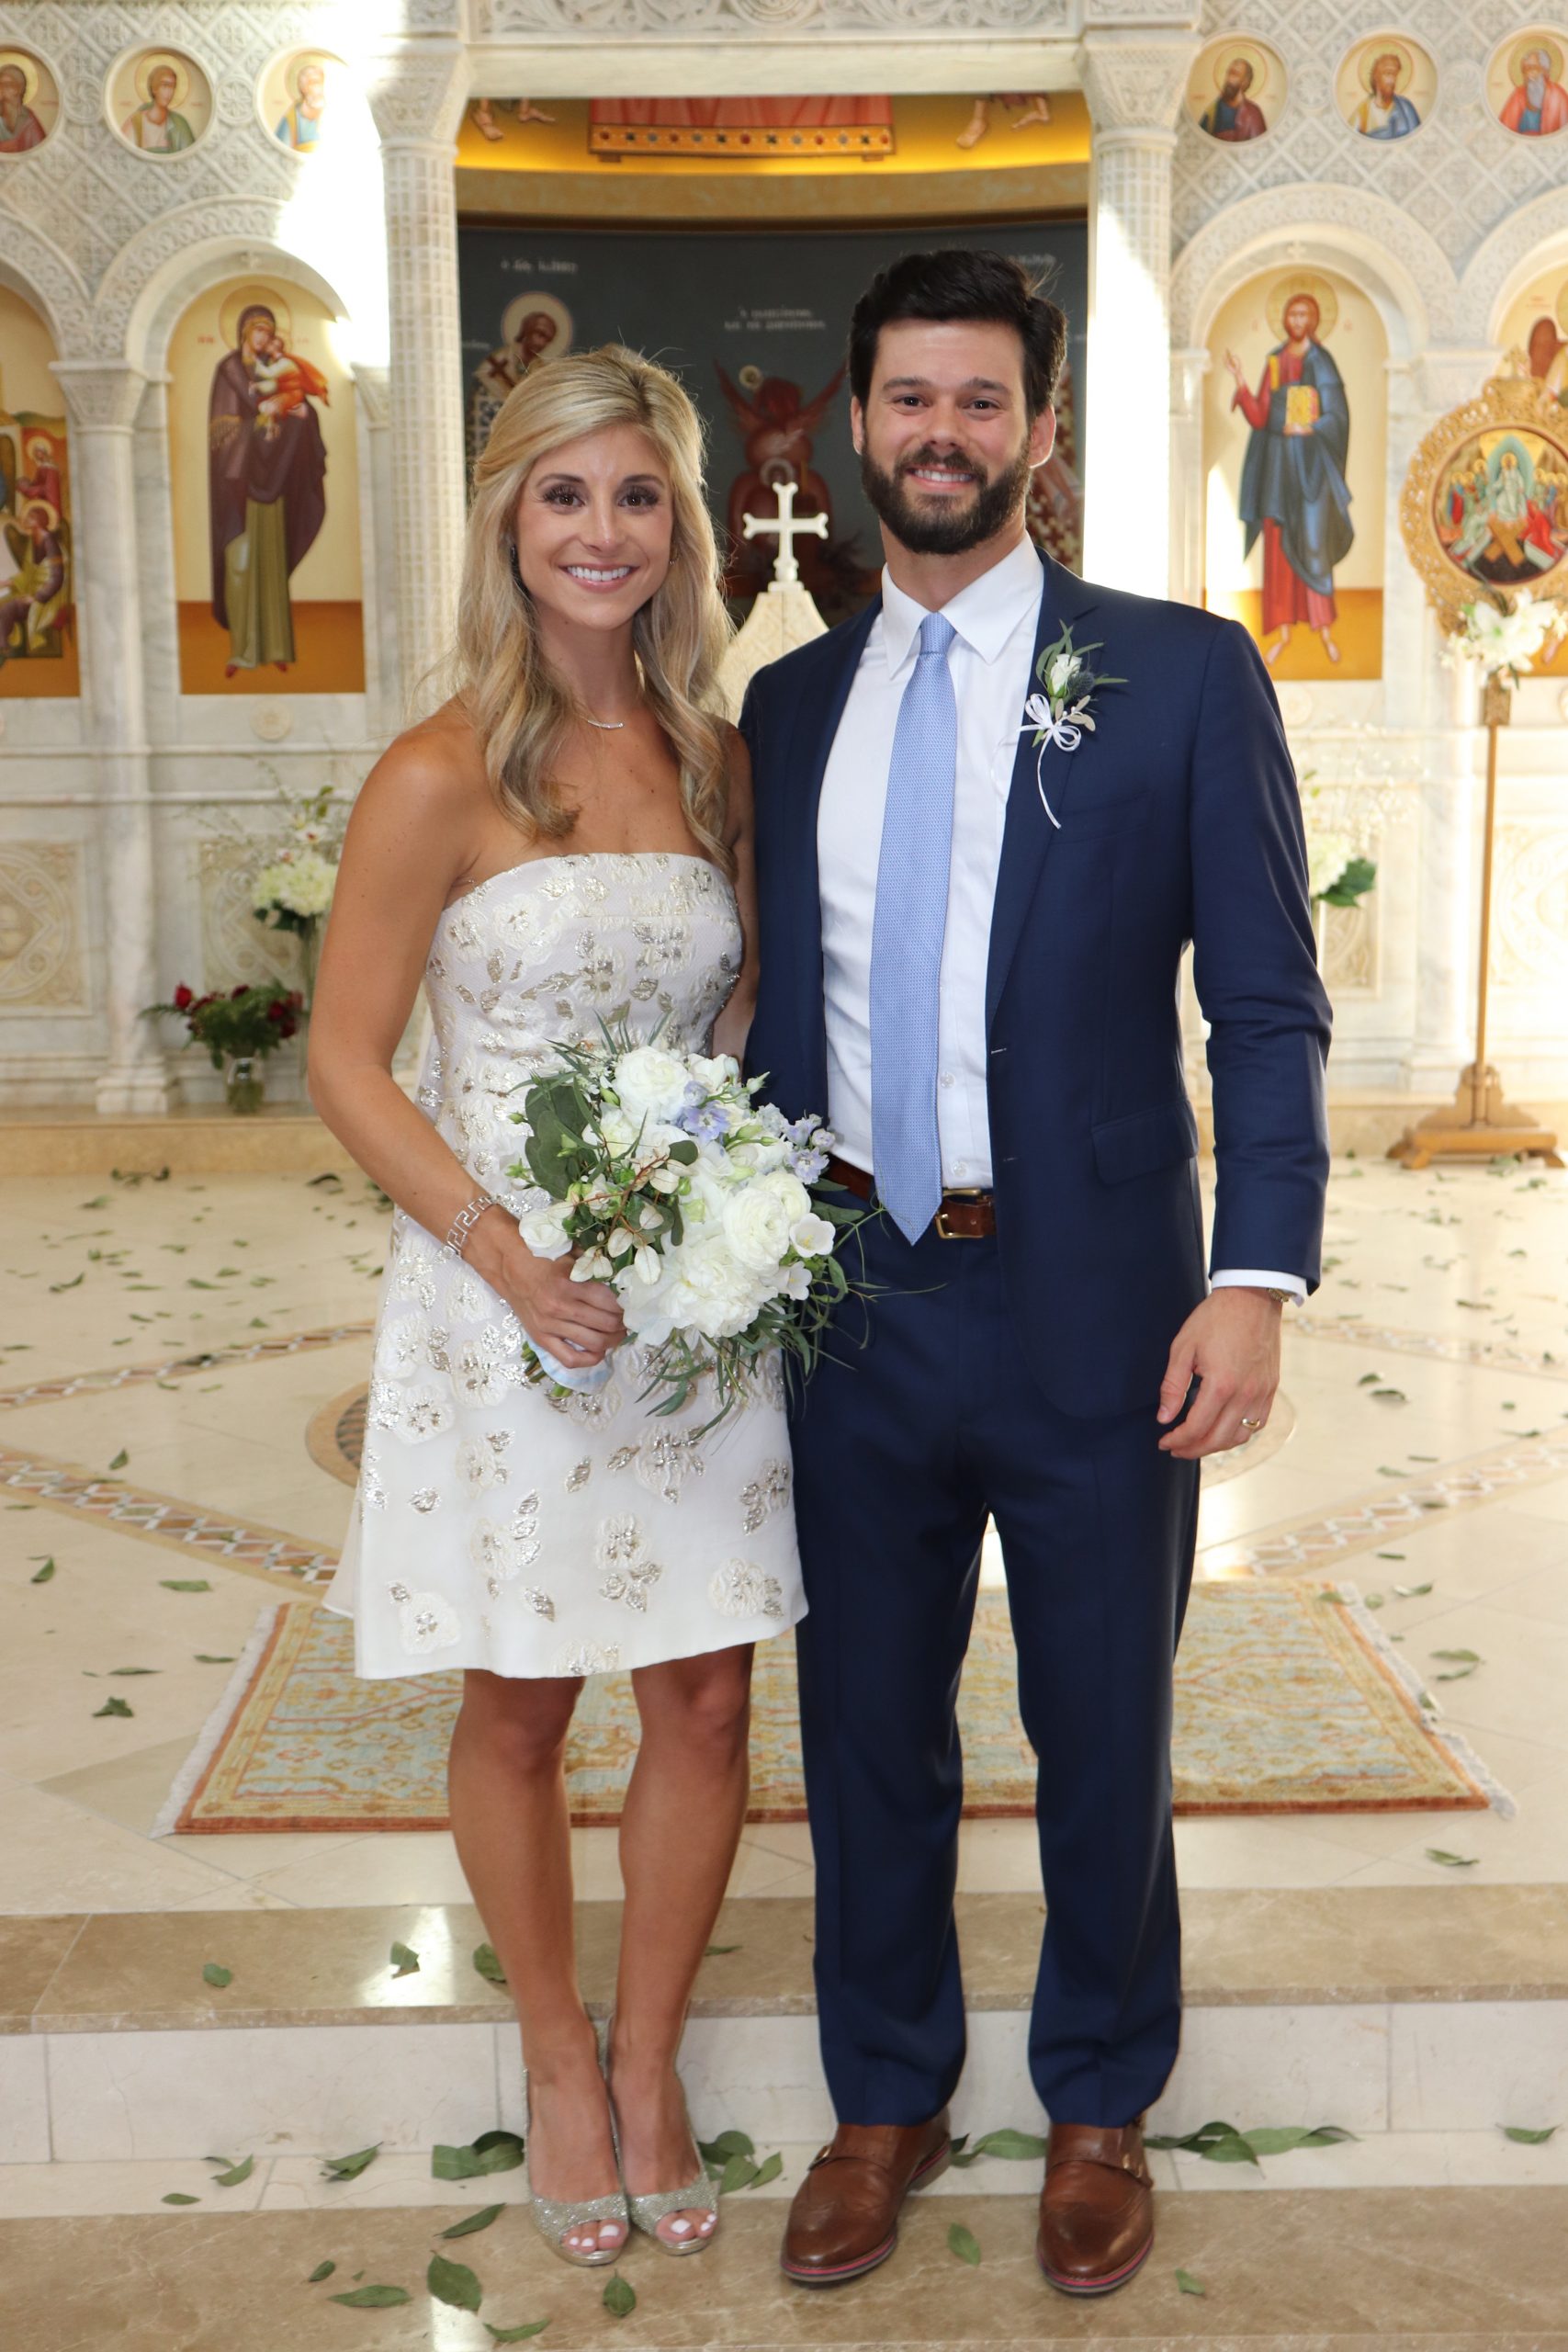 Georgia Theodore and James Williams tied the knot on May 16 at Holy Trinity Greek Orthodox Cathedral. The bride’s parents, Elyse and Drew Theodore, hosted an intimate 5 p.m. reception and dinner following the ceremony. Since Georgia and James come from large Greek and Italian families, this was unique as they never have small gatherings! Photography by Captured by Camlin Photography 